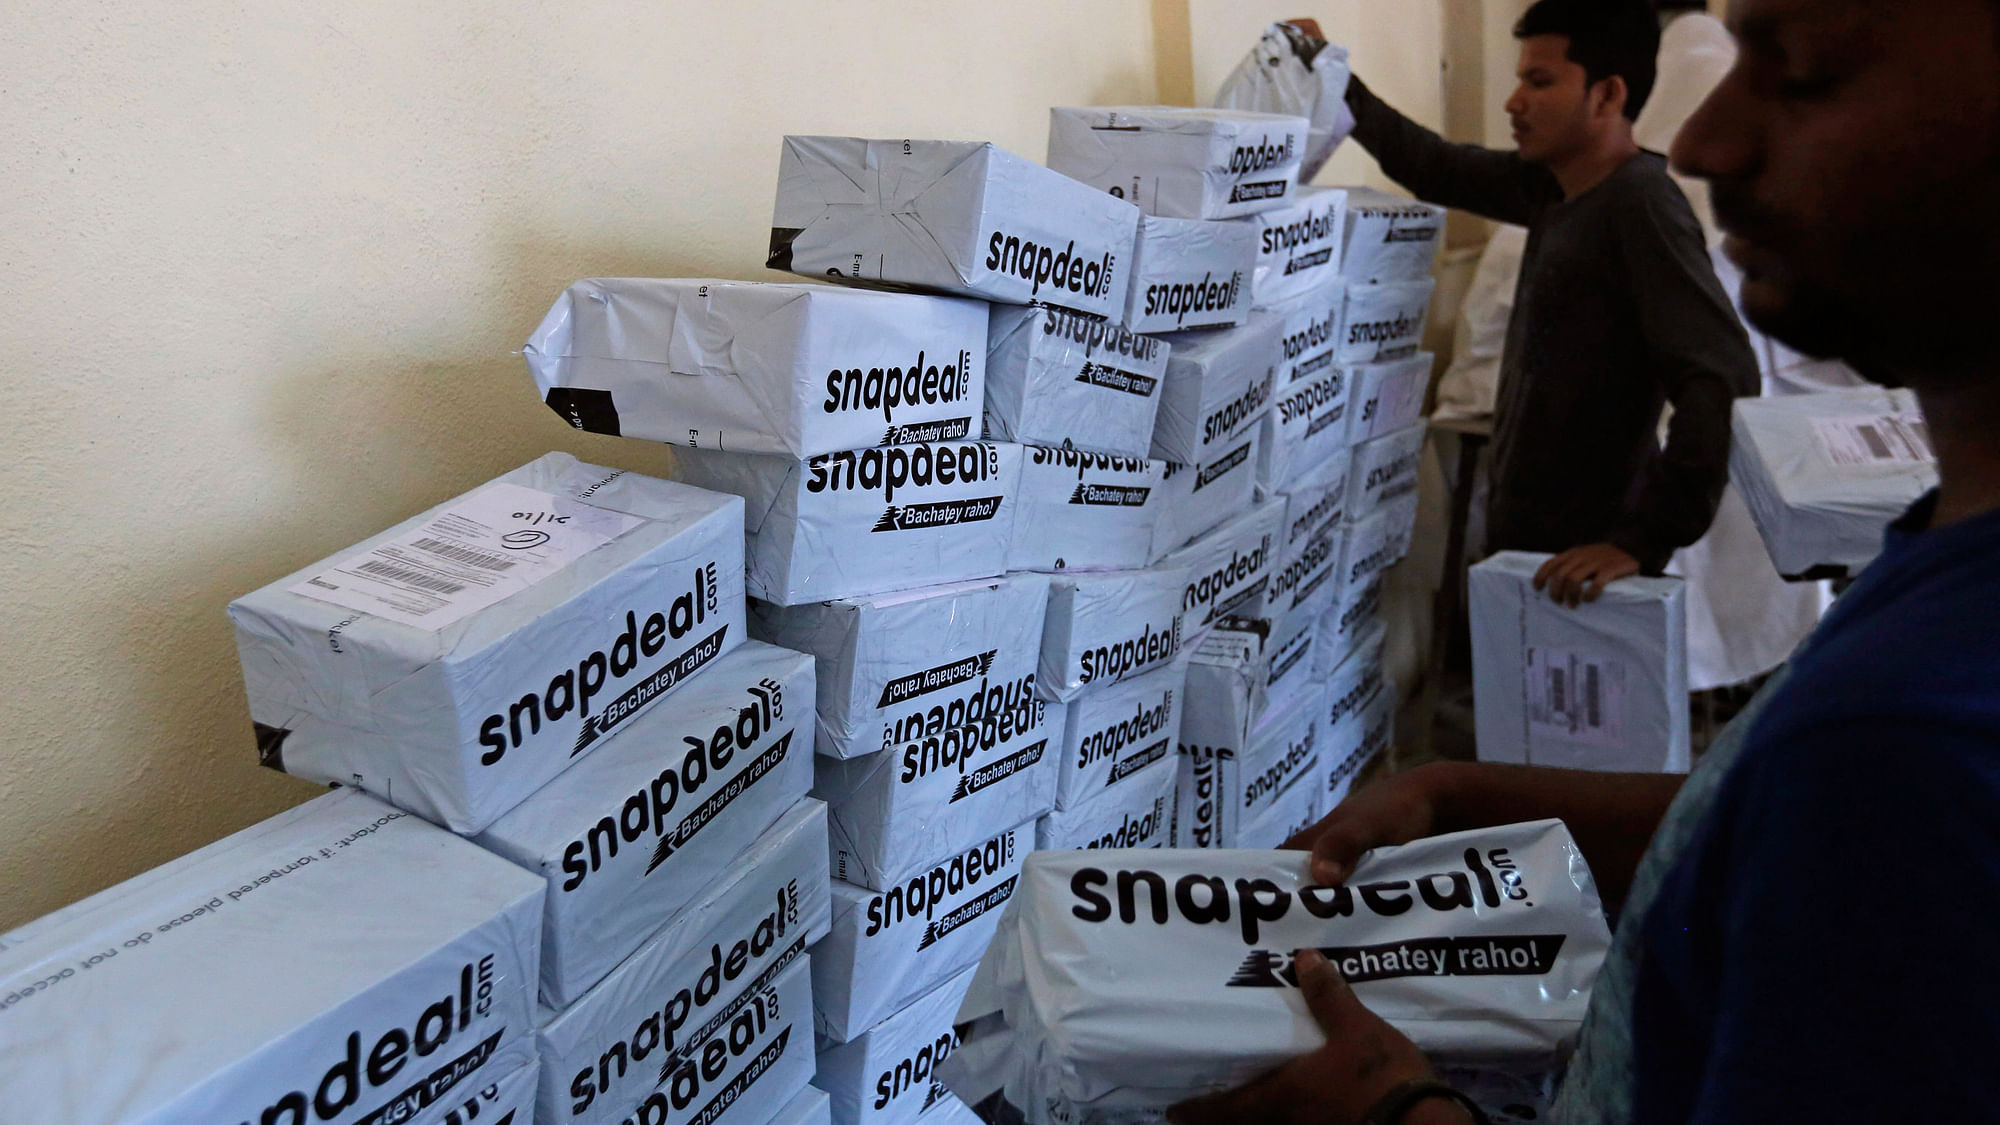 Online retailer Snapdeal’s board has rejected rival Flipkart’s takeover. (Photo: Reuters)